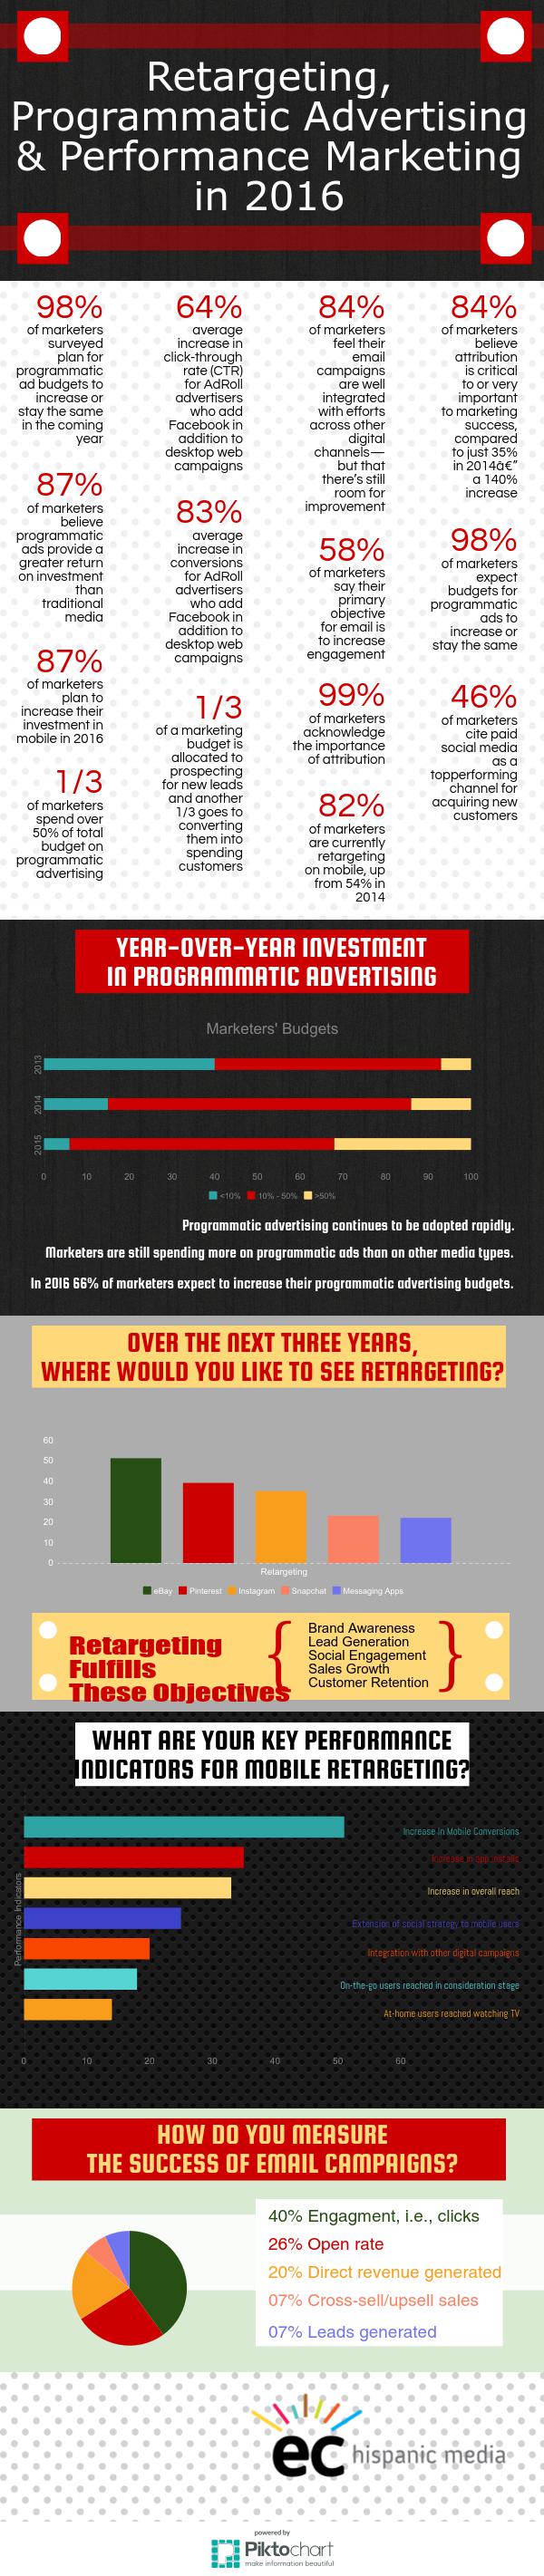 Retargeting, Programmatic Advertising, and Performance Marketing in 2016 Infographic